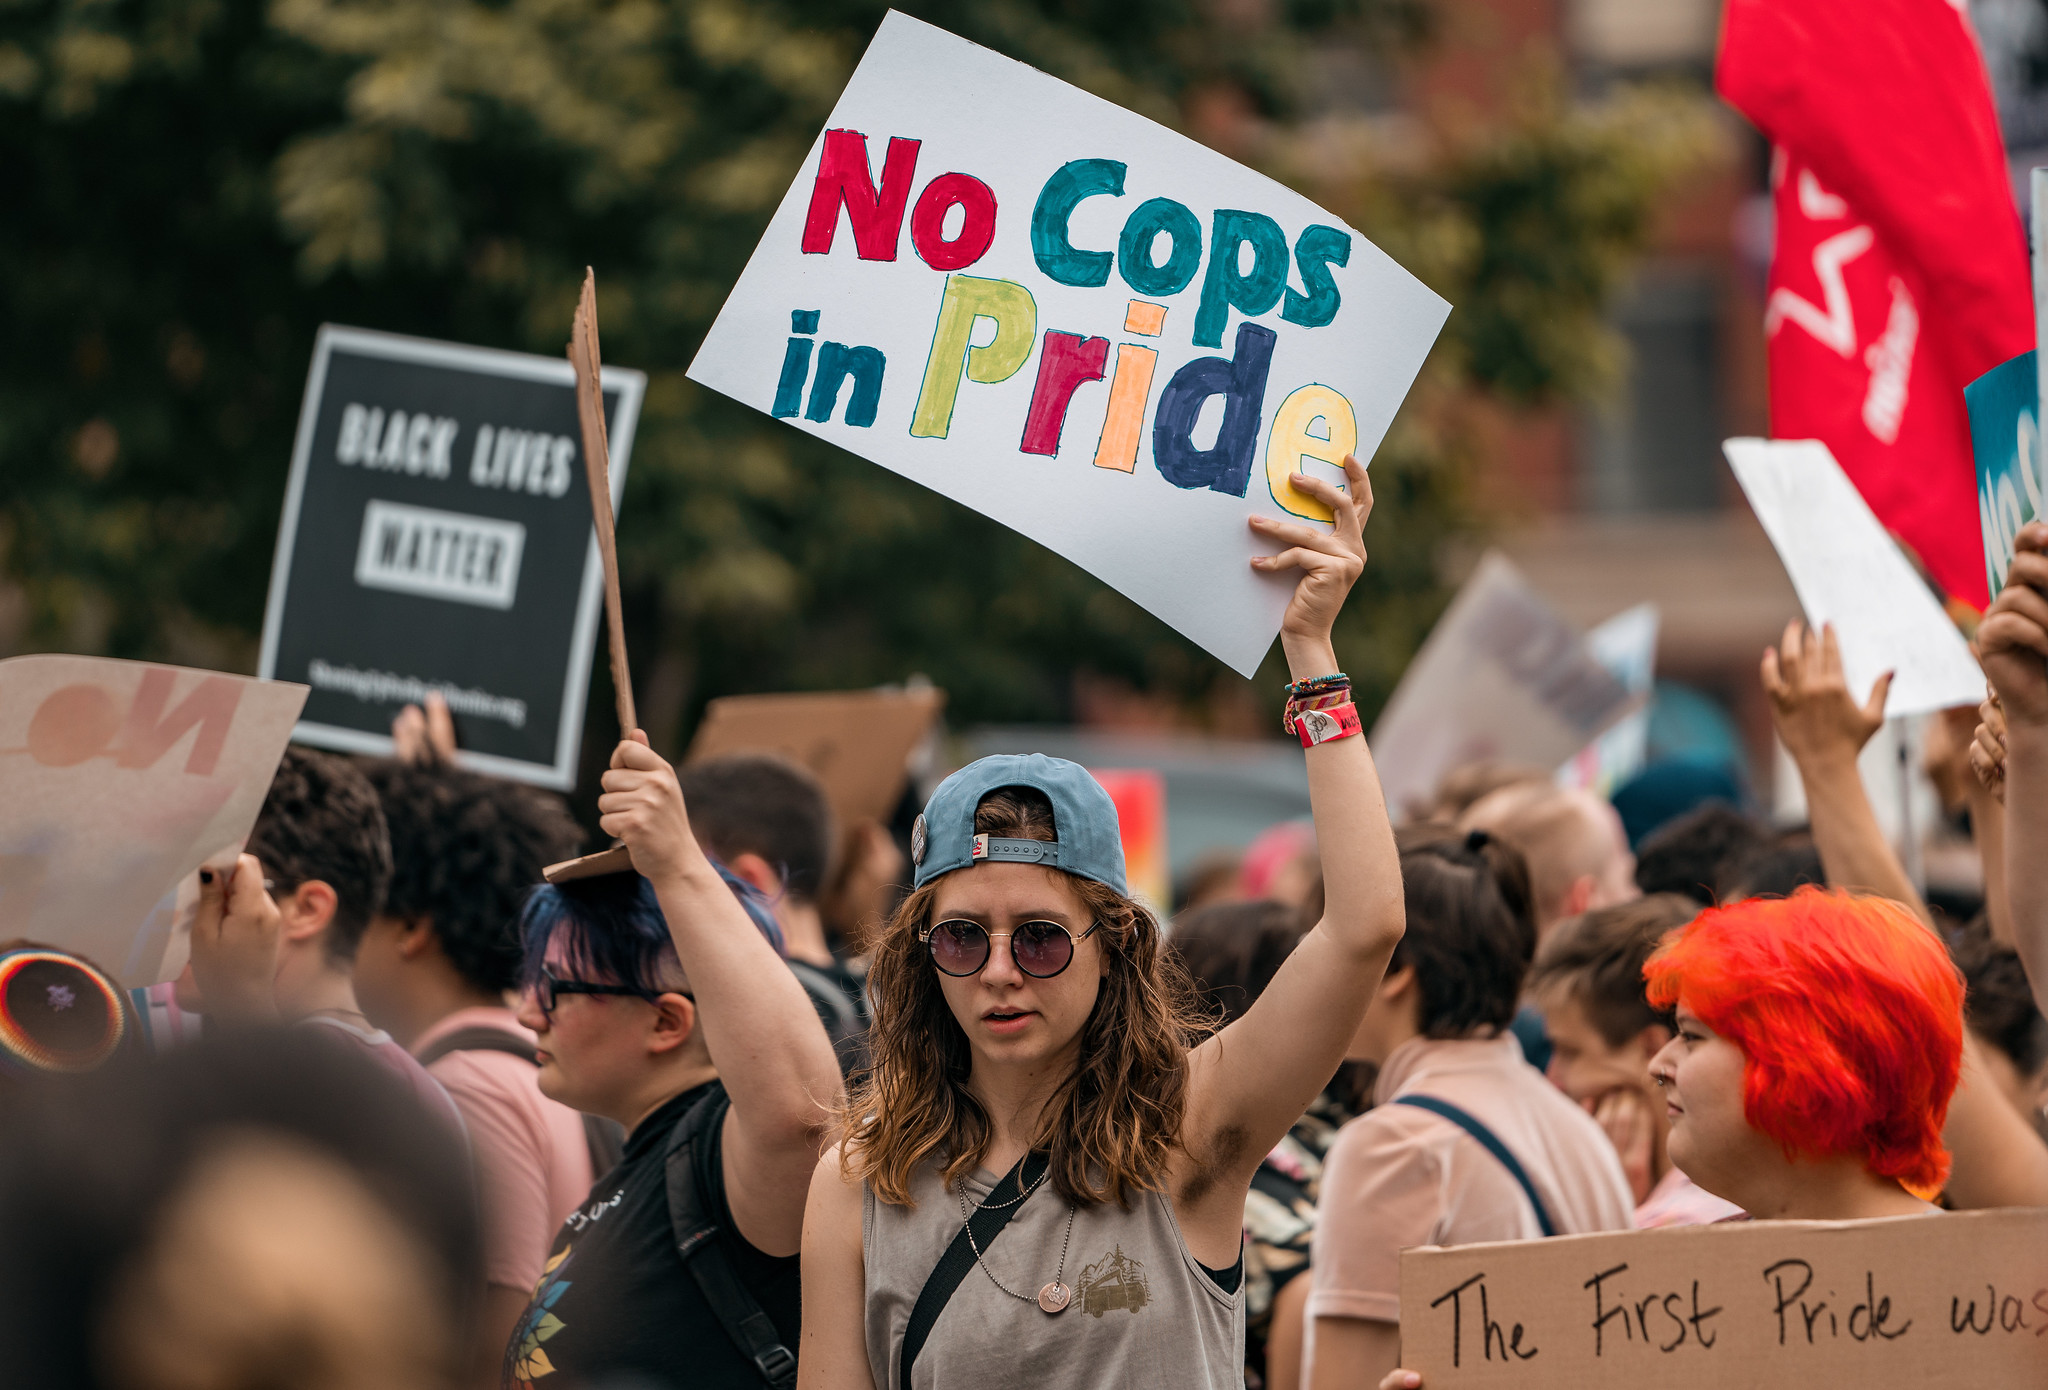 a person in a gray shirt and backwards baseball hat holds a colorful handwritten sign that says "no cops in pride"